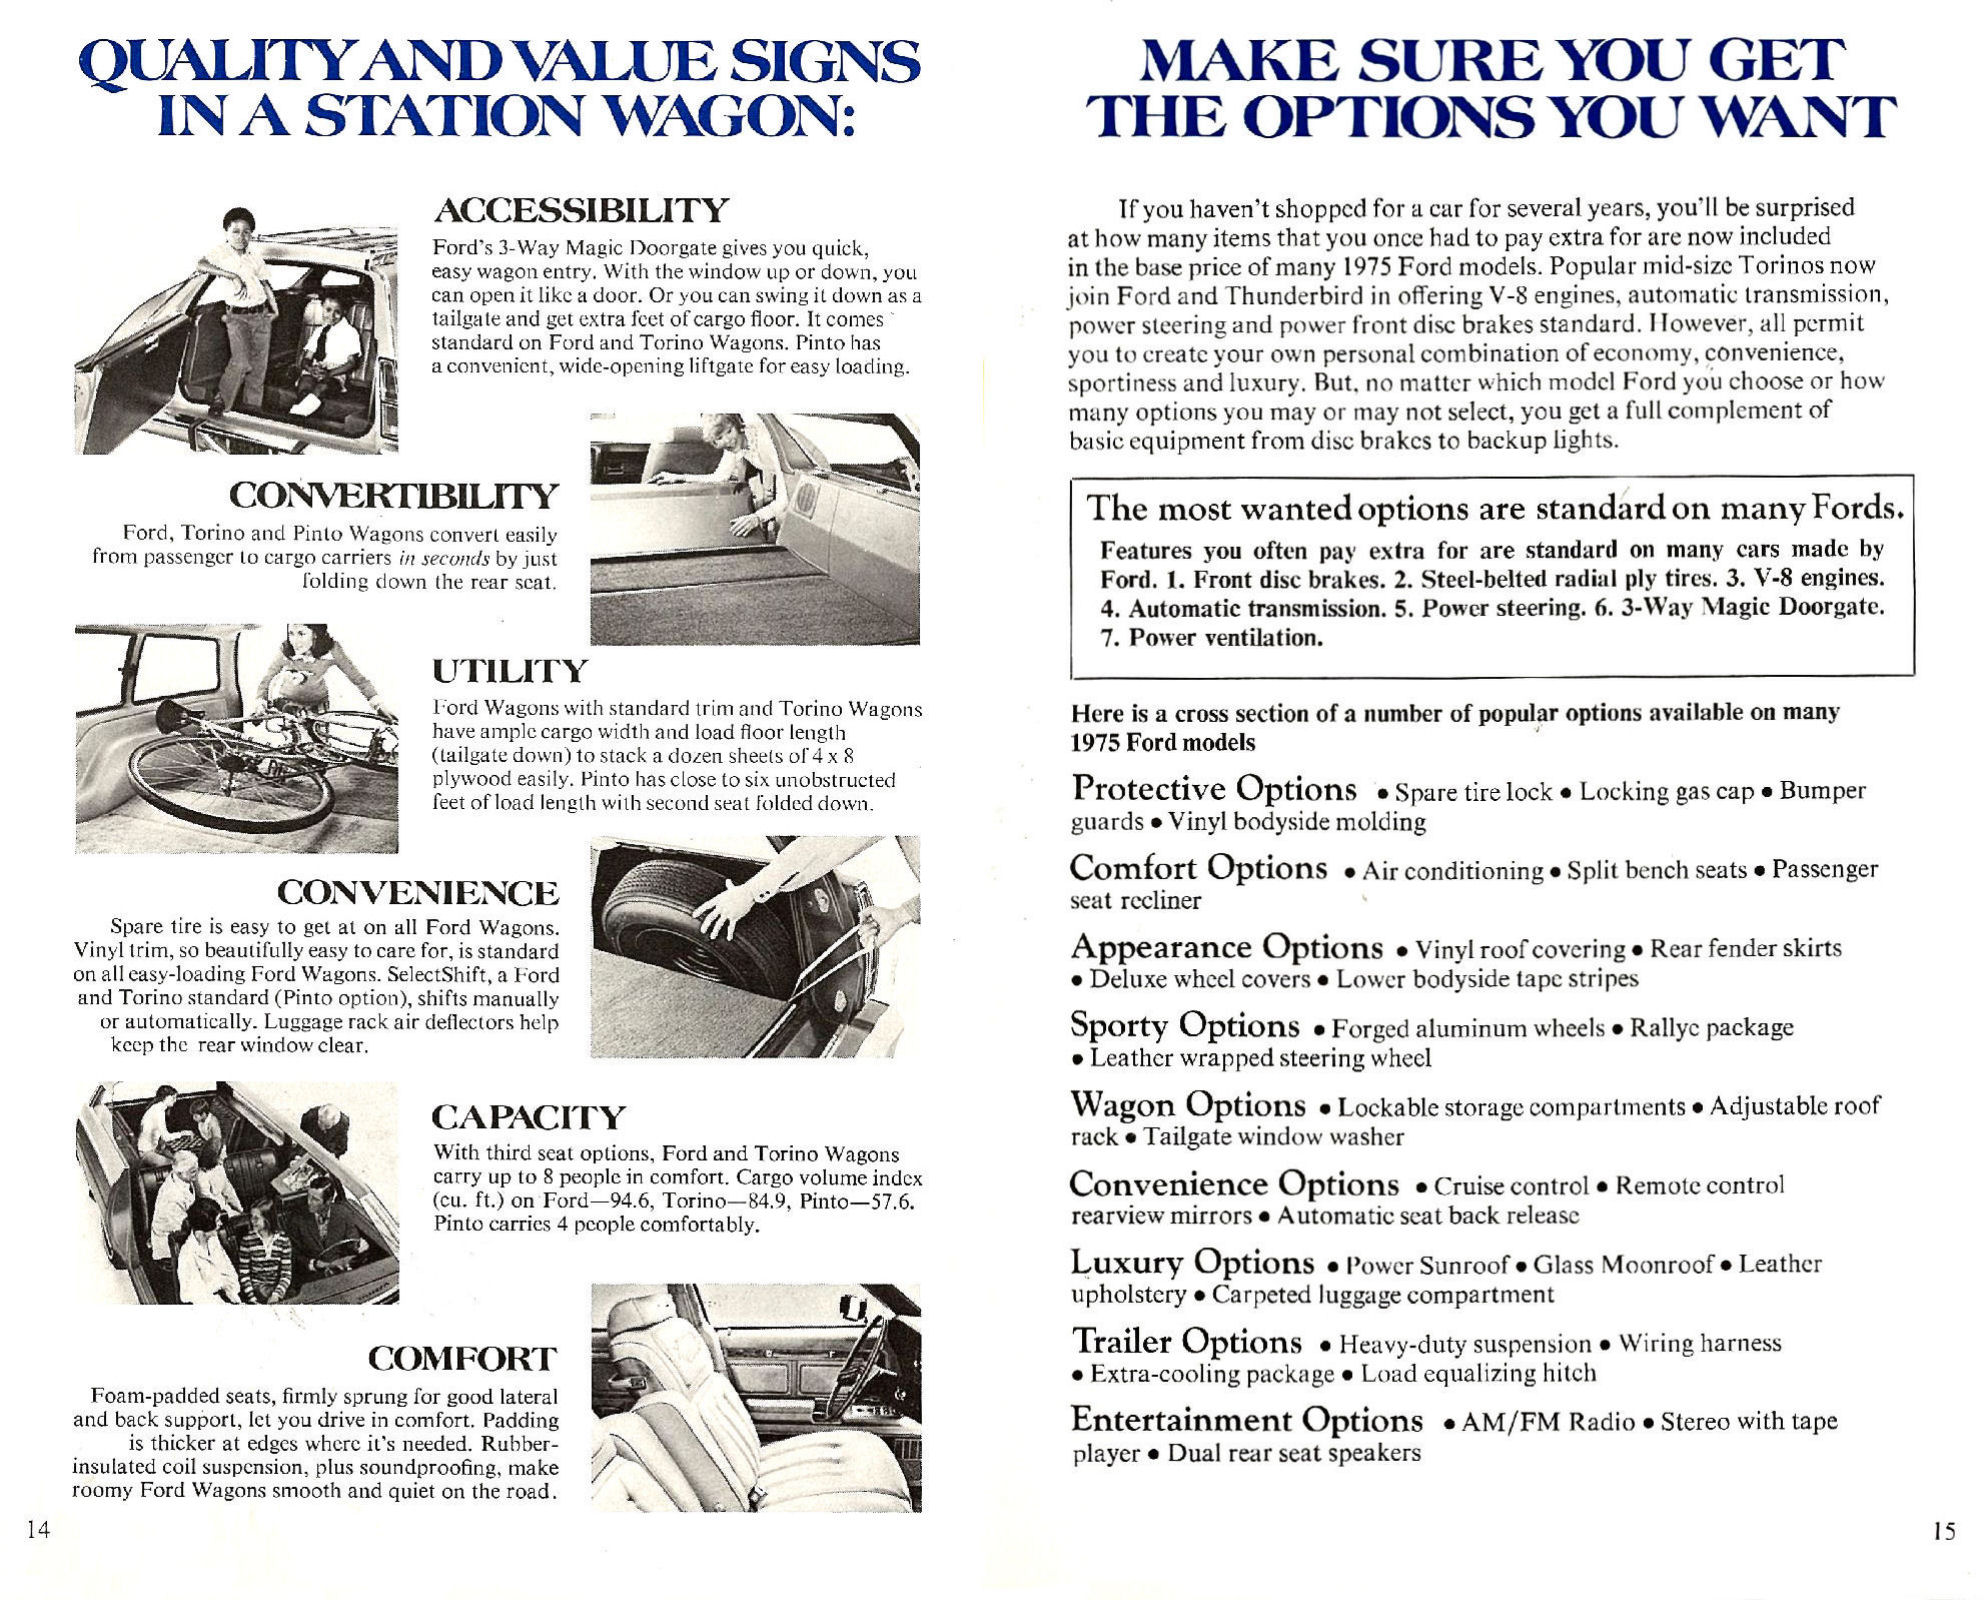 1975 Ford Closer Look Book-14-15